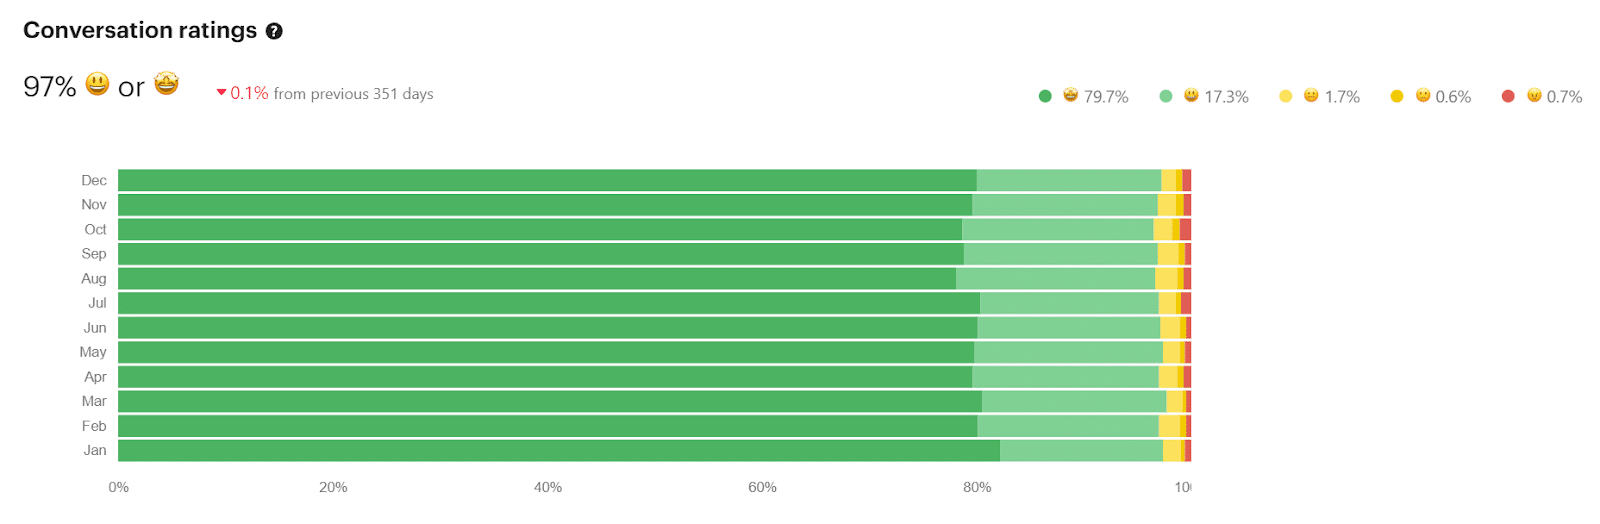 A green horizontal bar graph showing Kinsta's 97% conversation ratings by month in 2021.